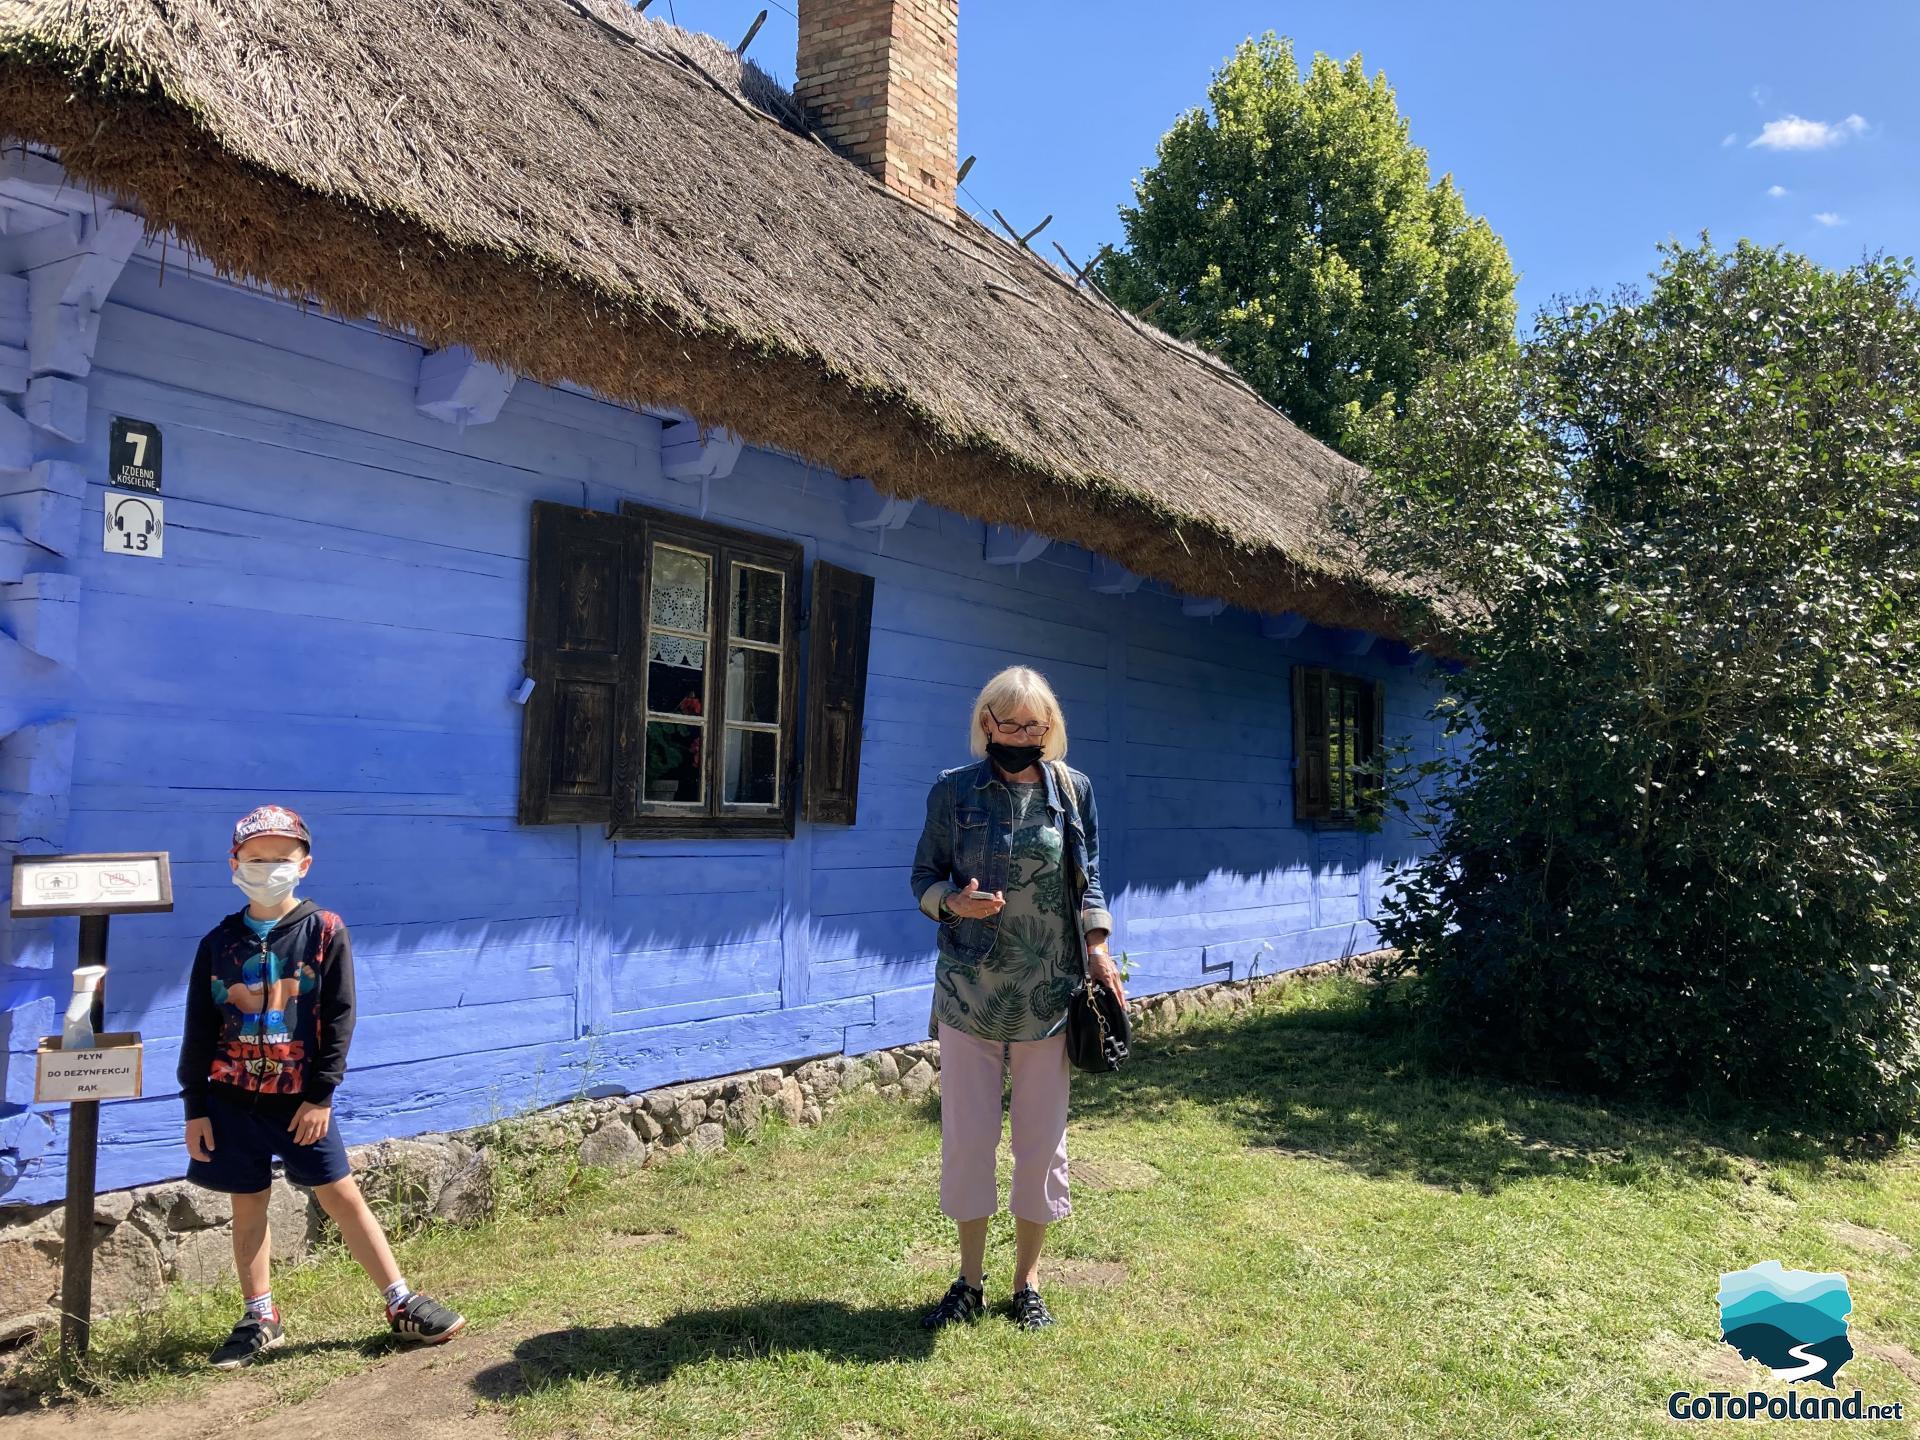 a boy and a old woman in front of blue hut